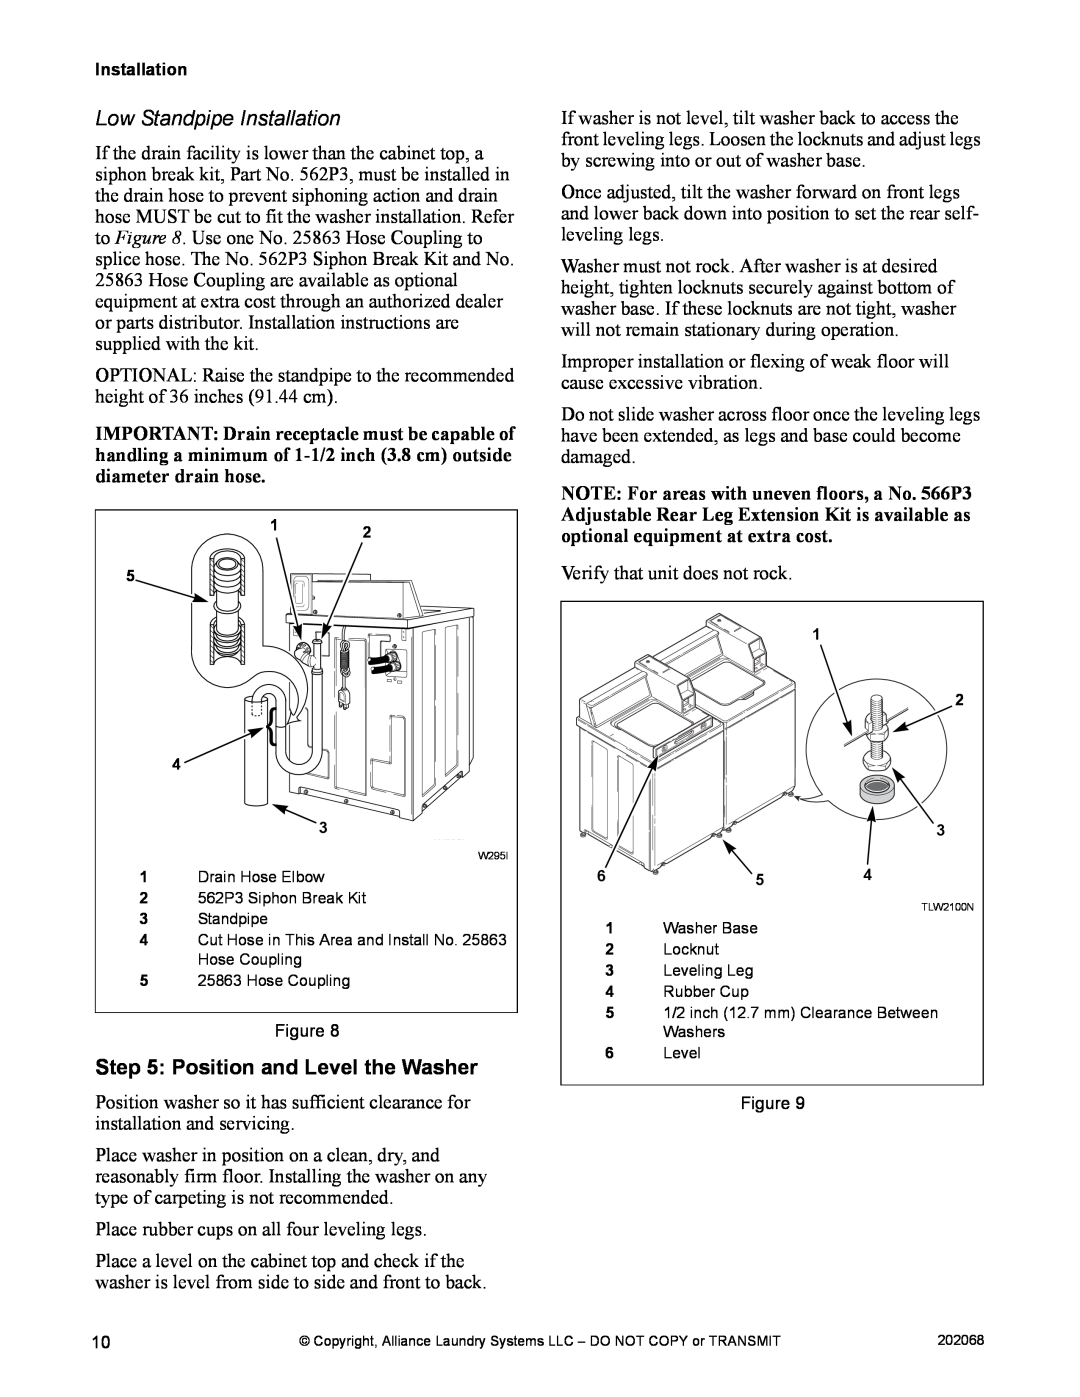 Alliance Laundry Systems TLW12CTLW12C manual Low Standpipe Installation, Position and Level the Washer 